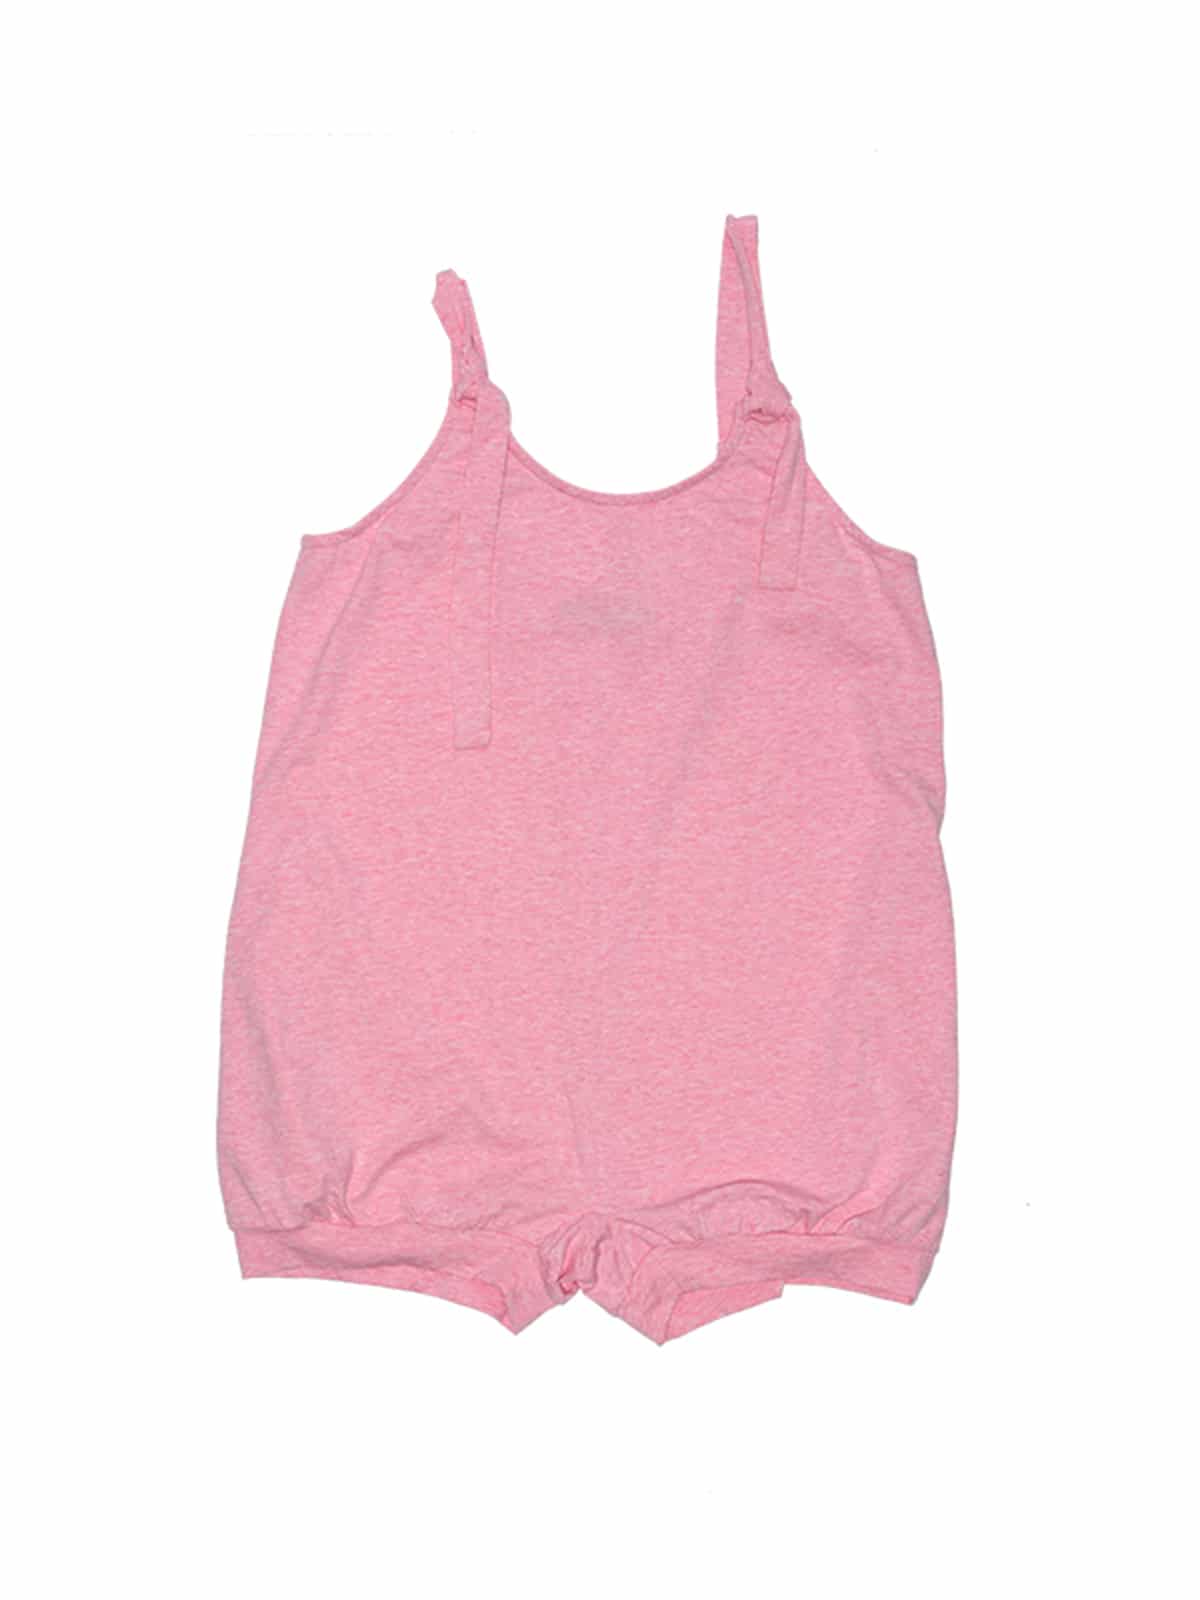 The Itty Bitty Bubbler Romper, Heathered Pink